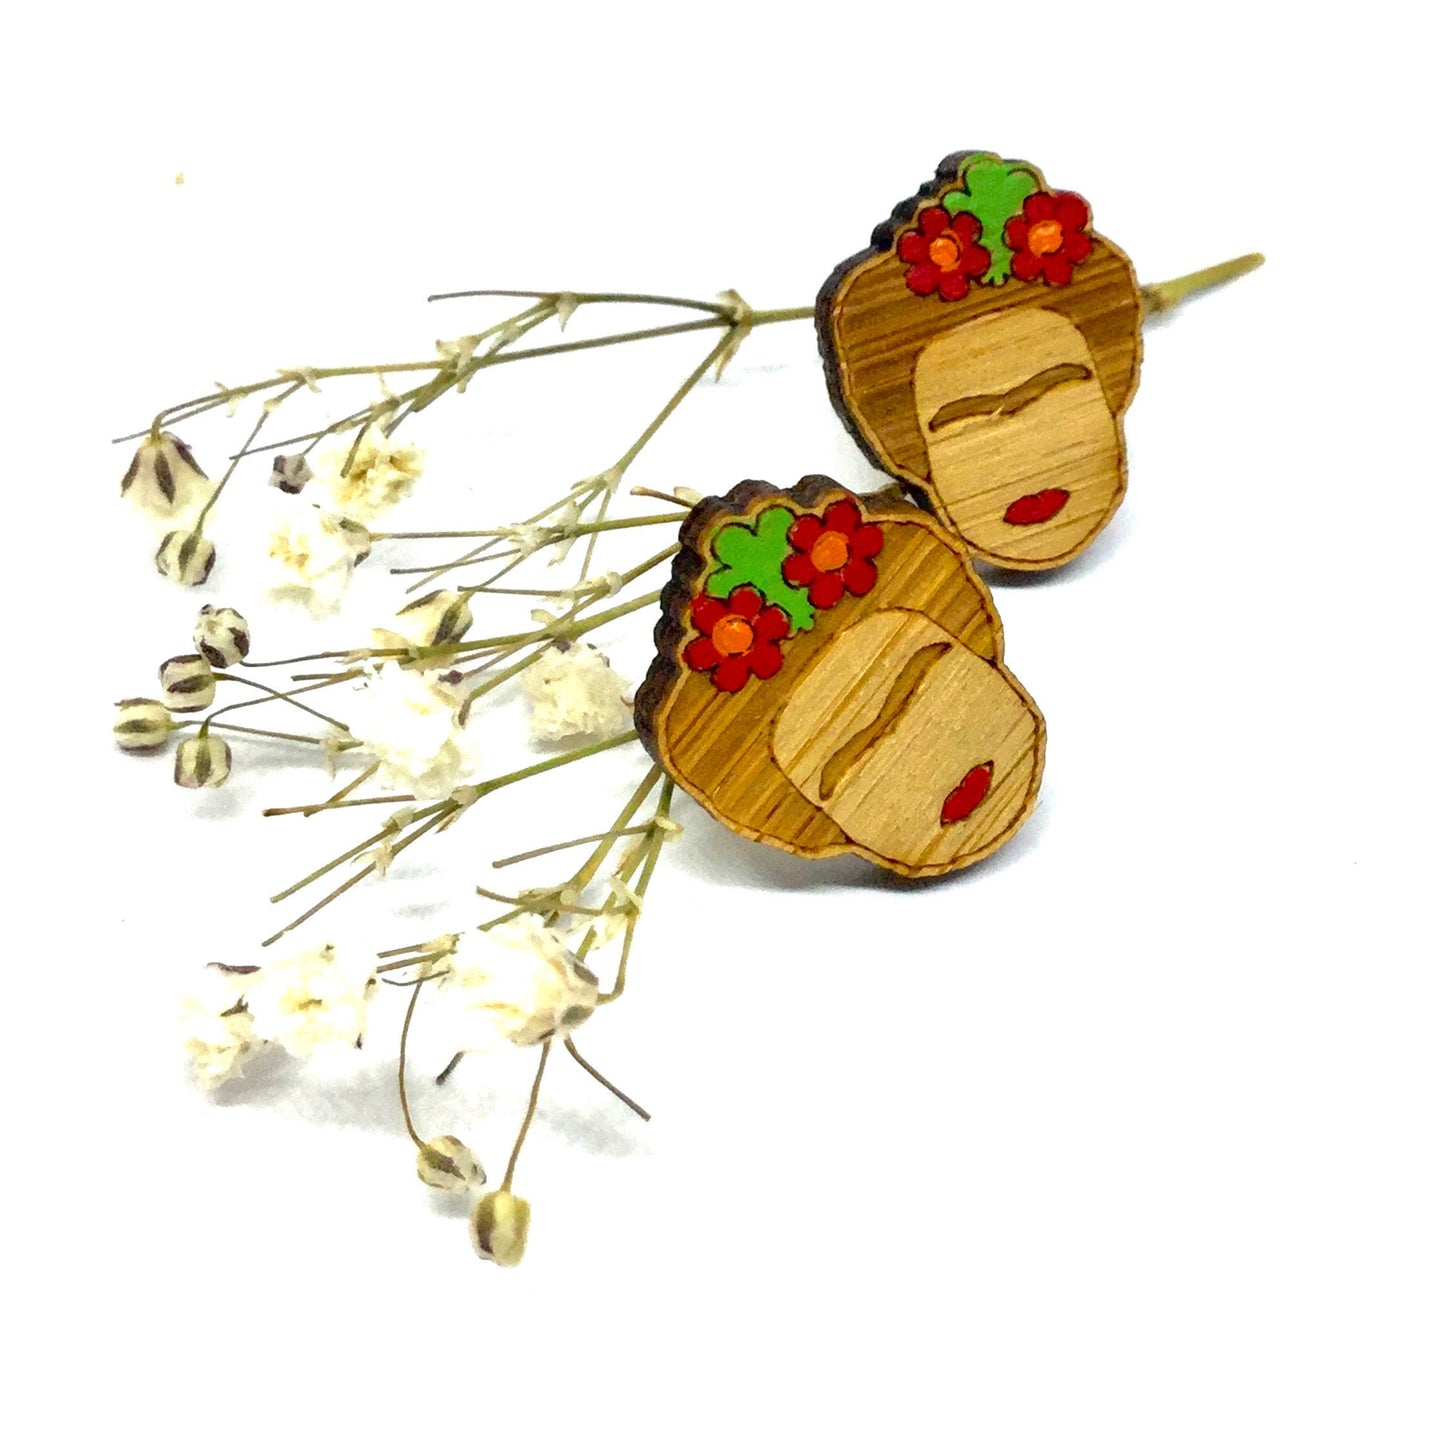 Cute Frida Earrings Stud Bamboo Wood HandPainted Red Flowers Floral Jewelry Girl Summer Fashion Casual Outfit Perfect Gift Idea Fridalovers